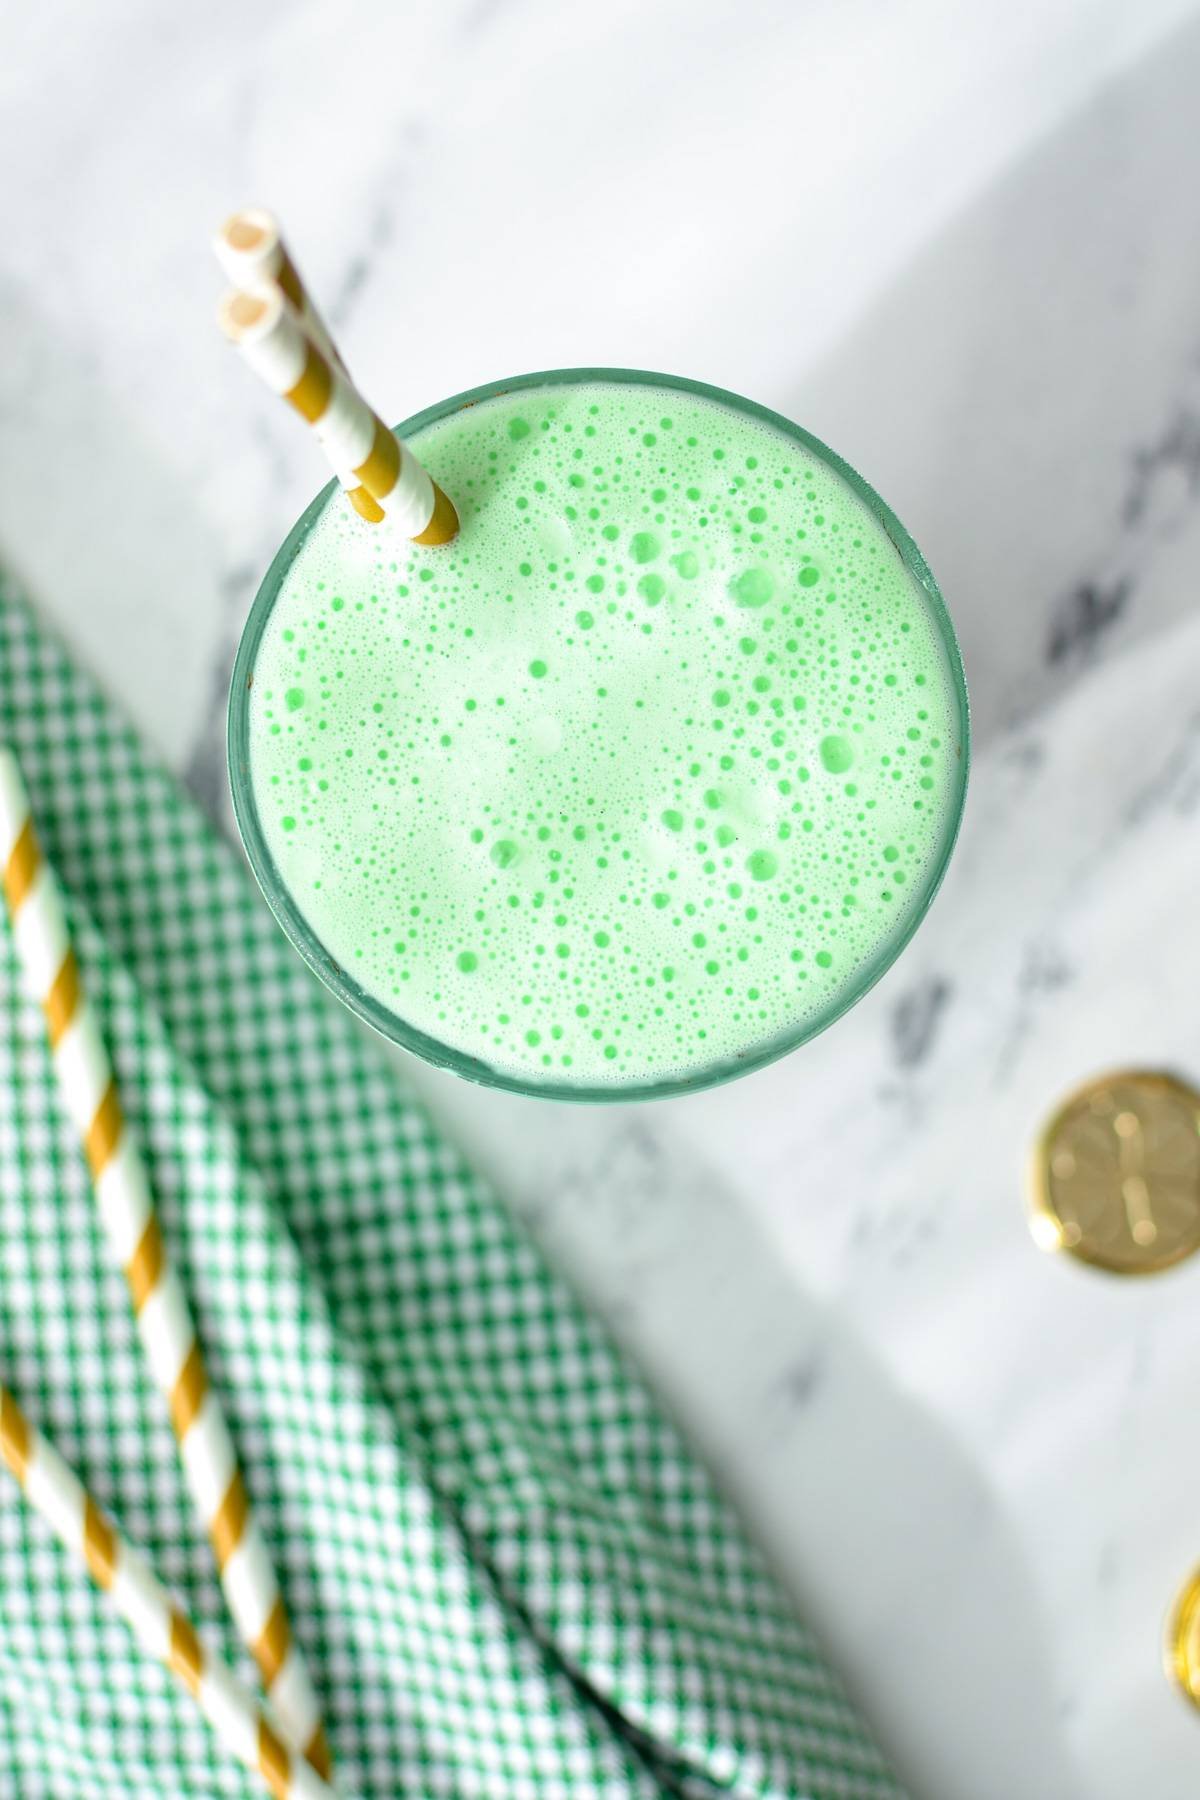 An overhead shot of a green milkshake with gold striped straws.